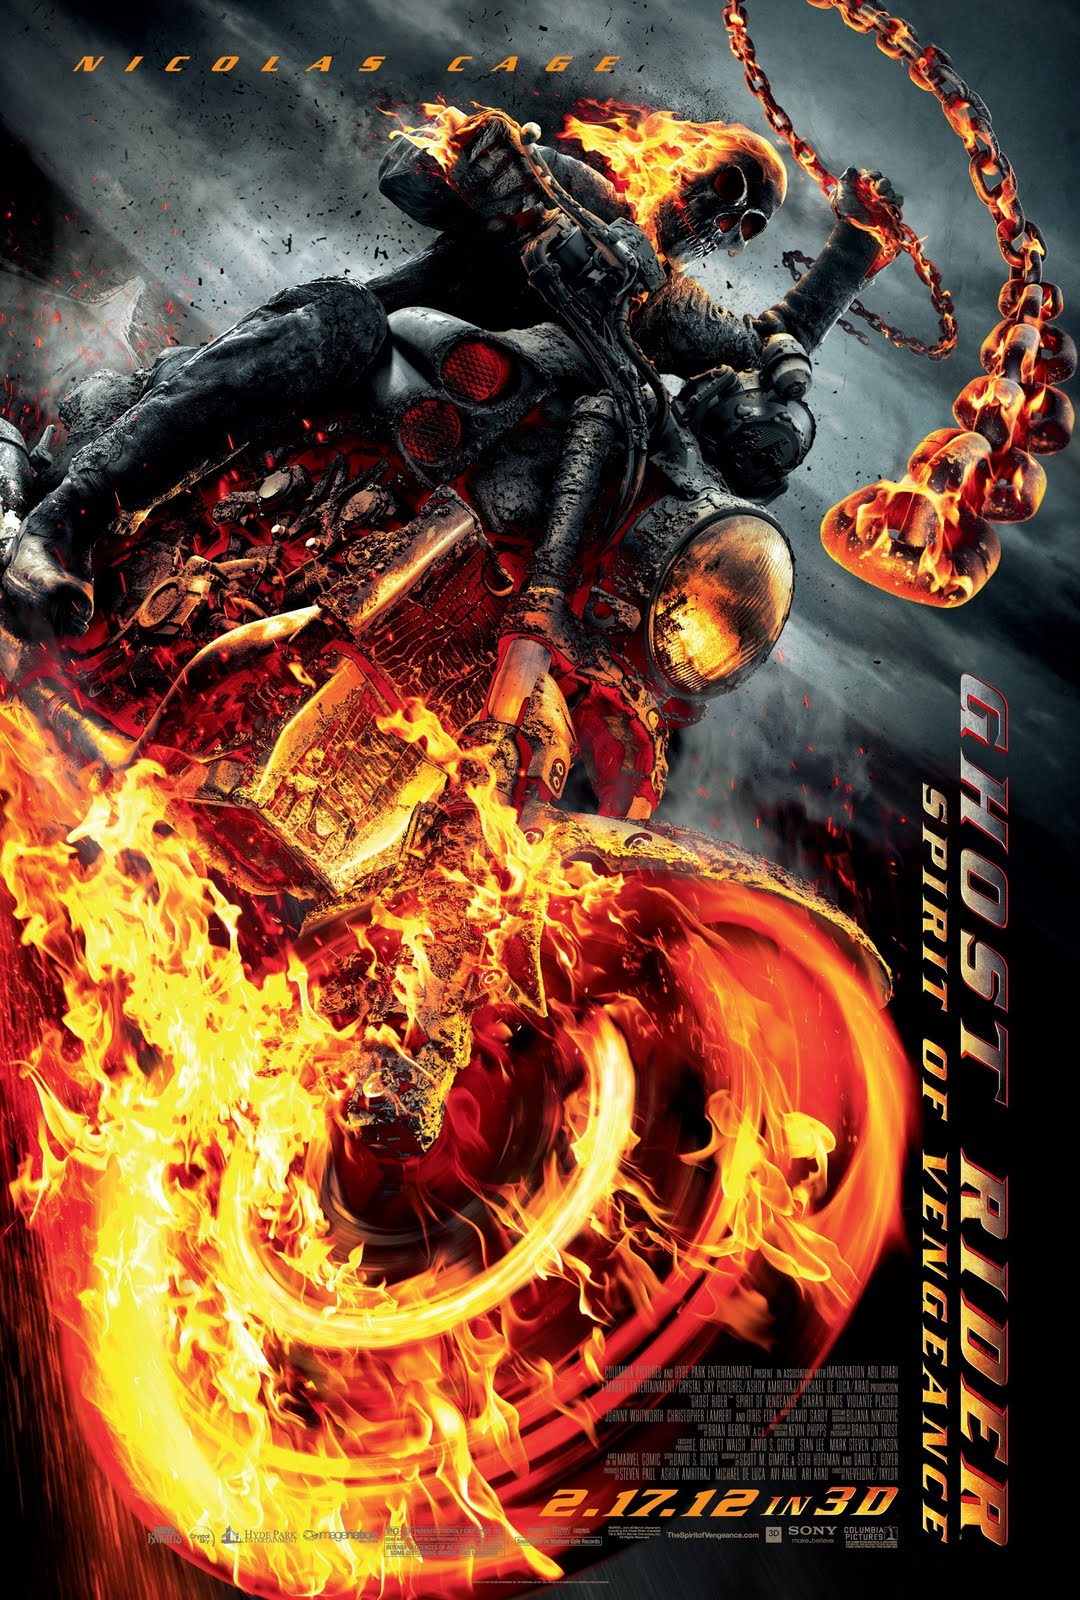 ghost rider 2 cast and crew